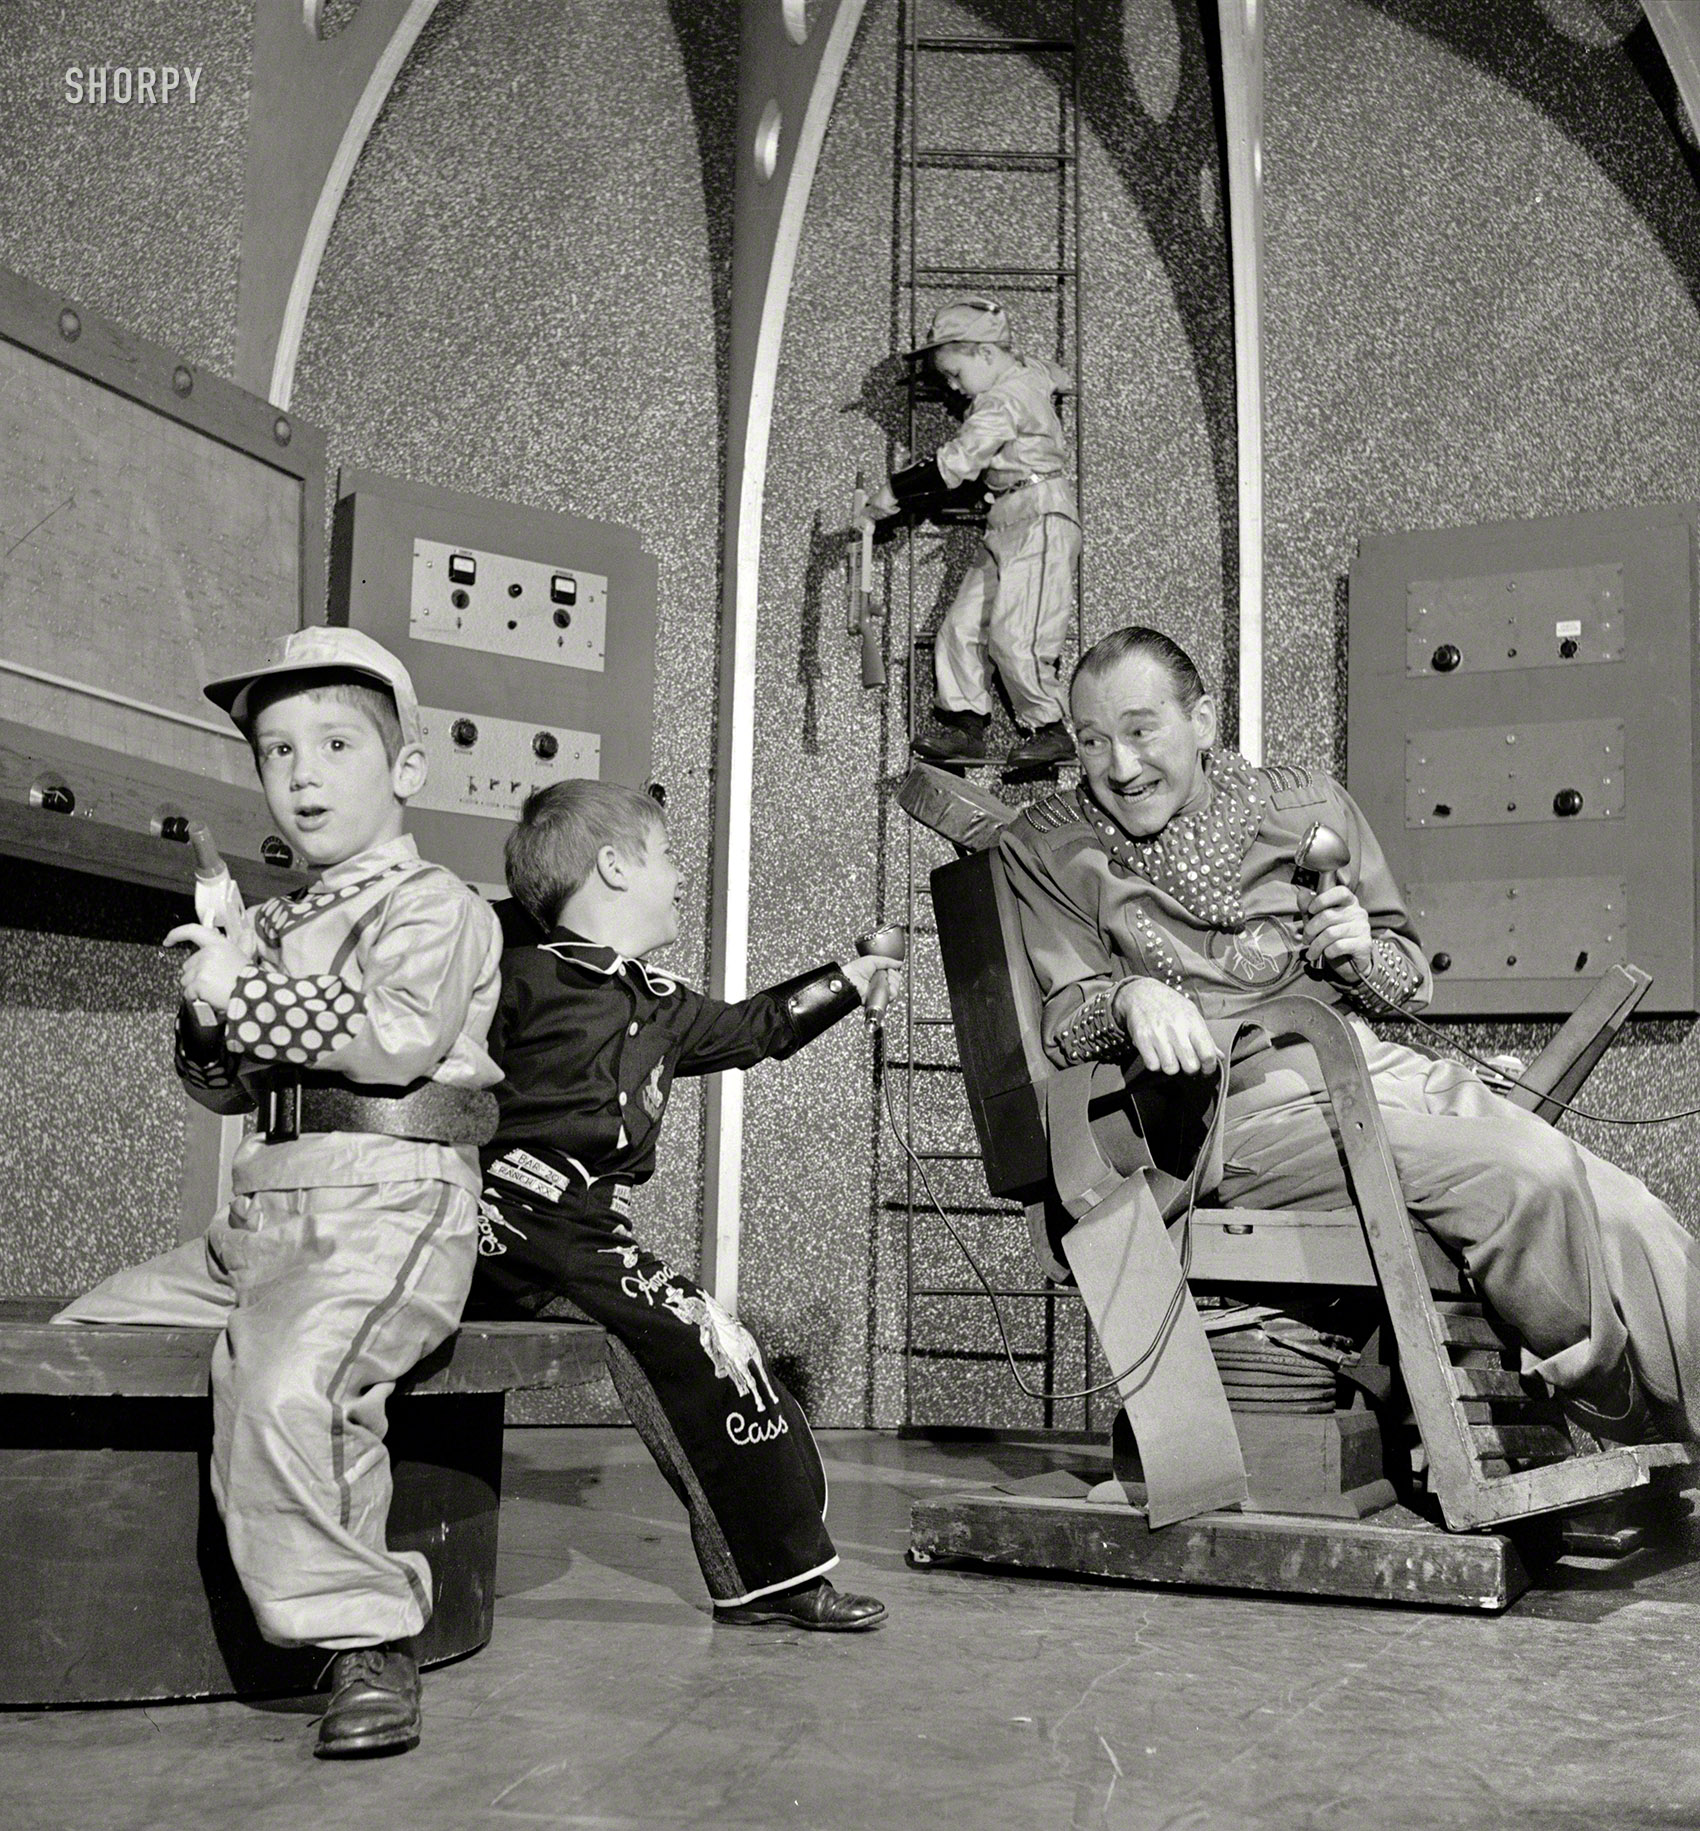 From 1952 comes this conflation of two popular genres in the children's TV show "Tom Corbett, Space Cadet." Photo by Charlotte Brooks for the Look magazine assignment "Cowboys and Meteors." View full size.